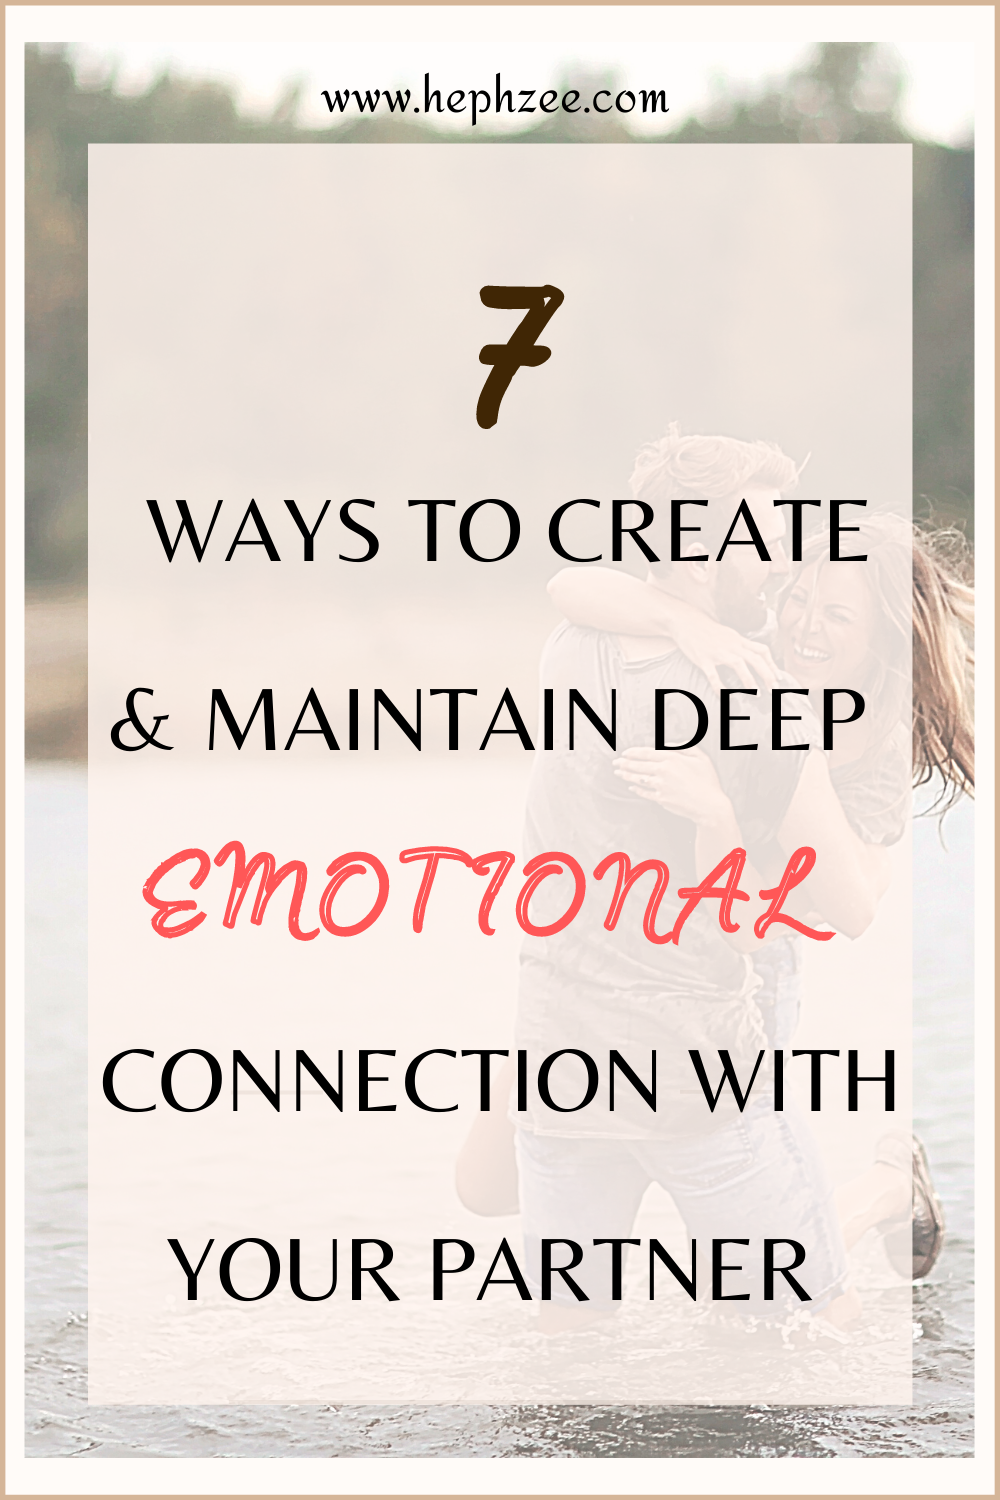 Ways to create deep emotional connection with your partner